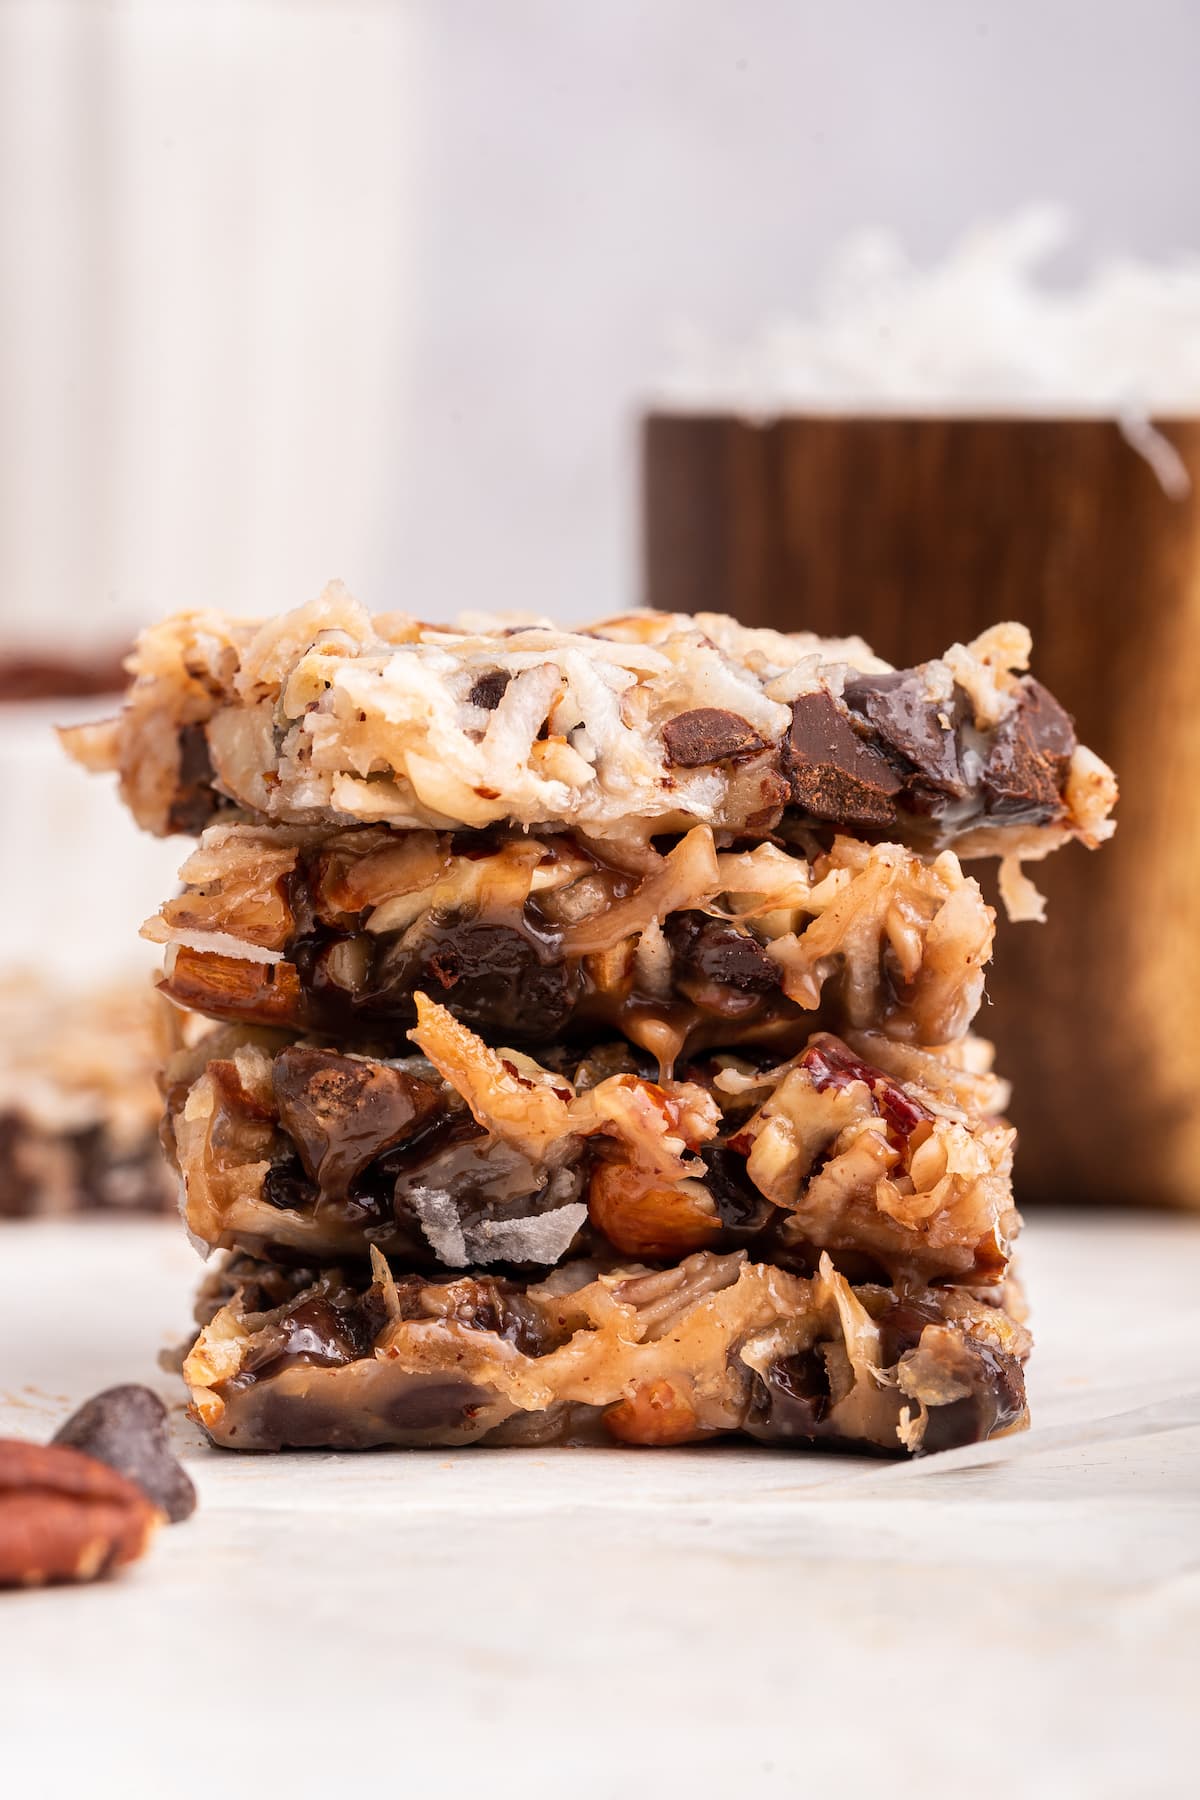 Four chocolate coconut bars stacked on one another.